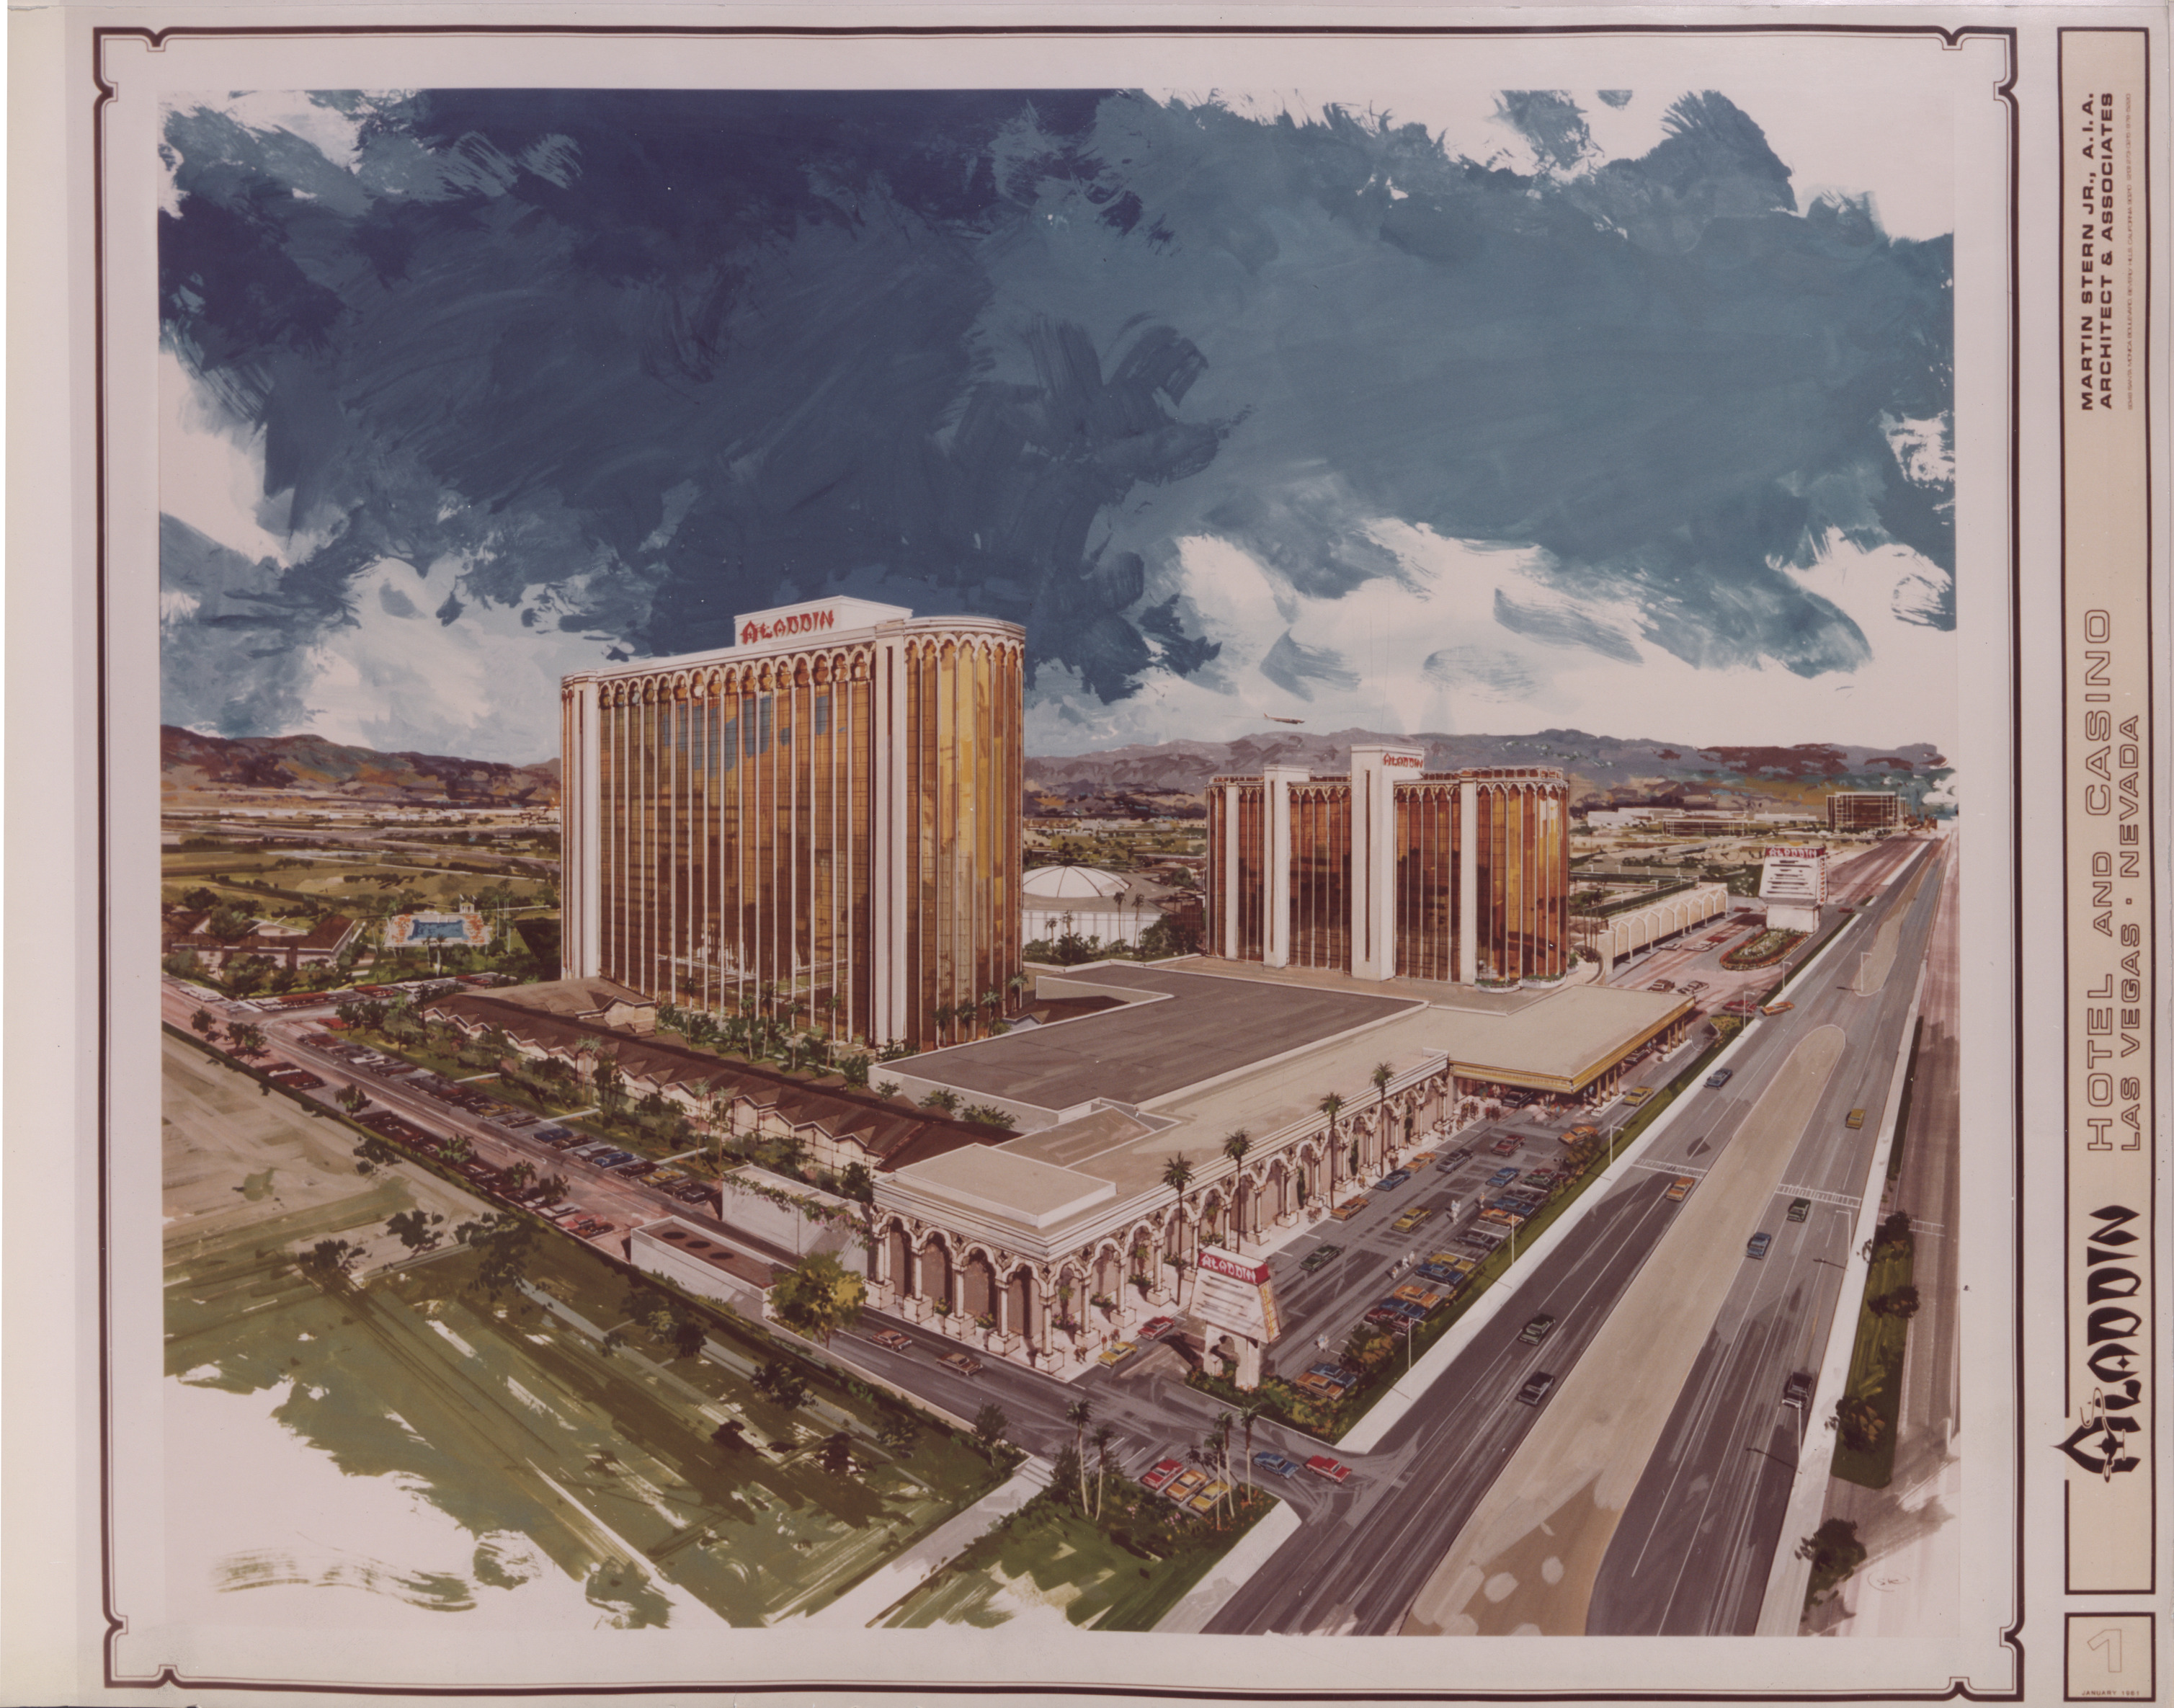 Proposal for the Aladdin high rise addition (Las Vegas), circa 1974, front cover